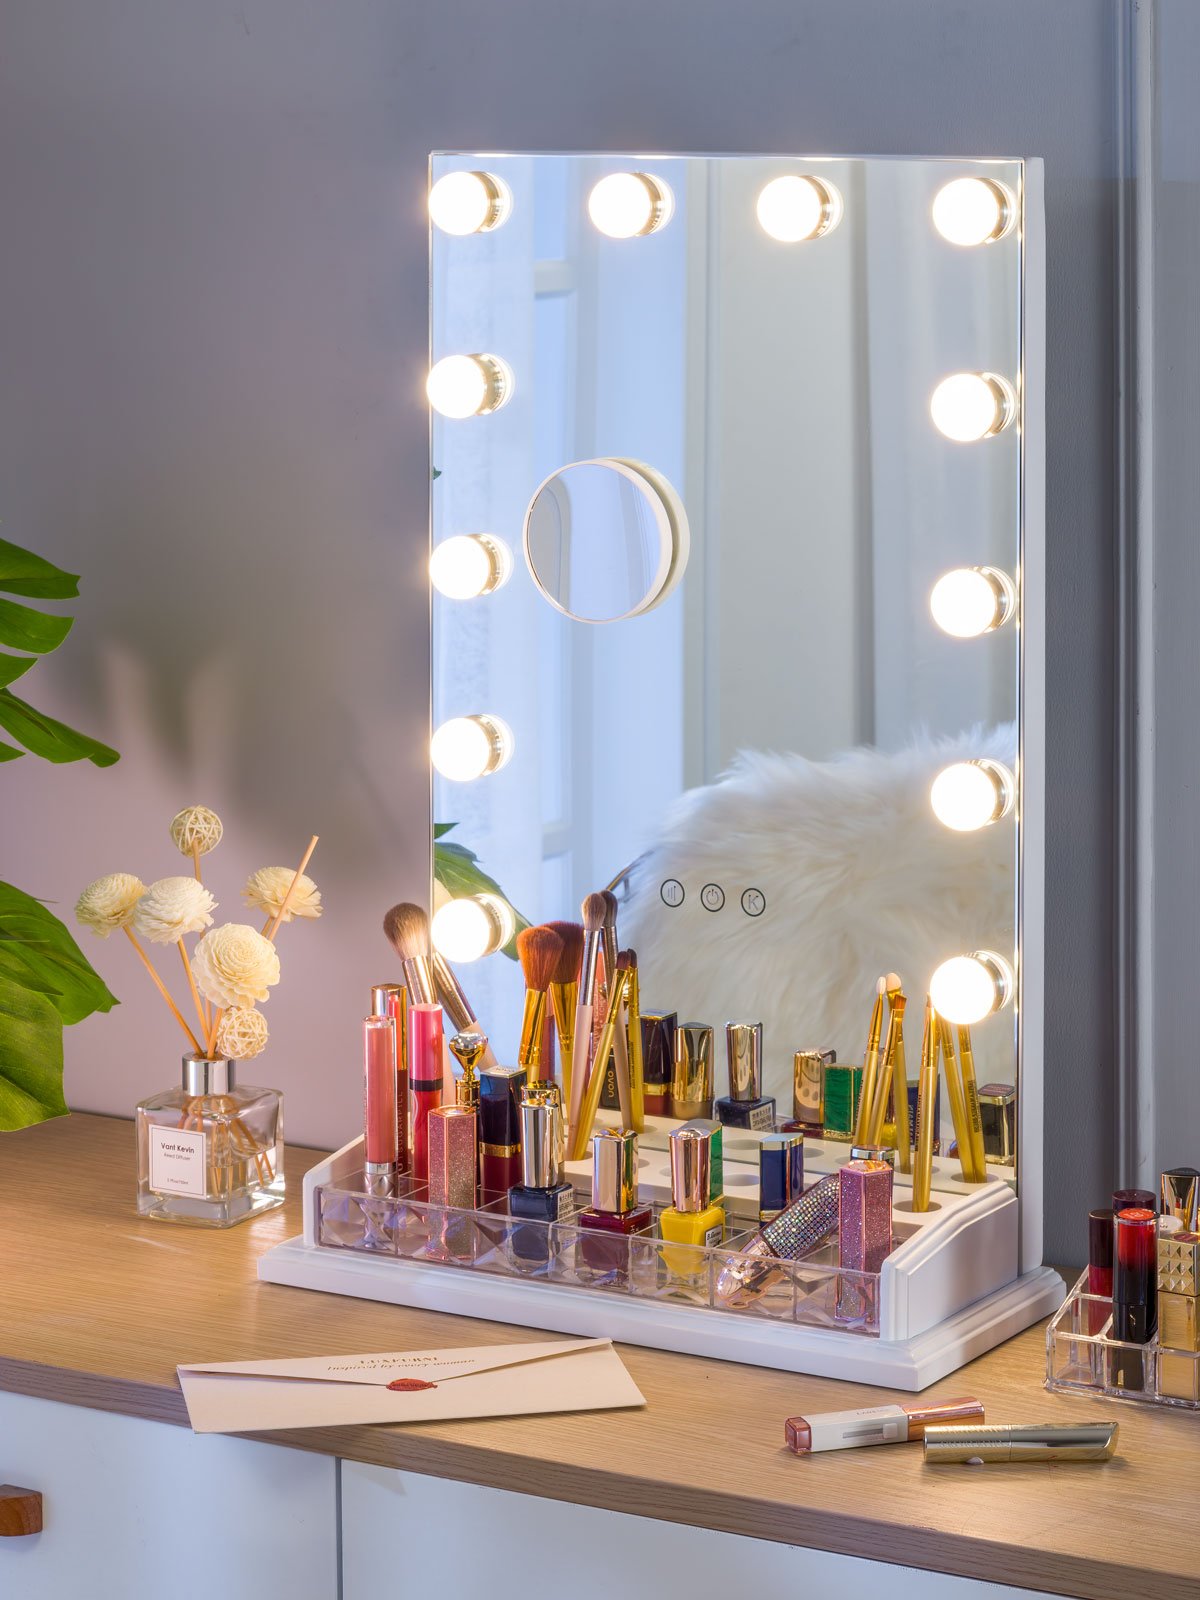 Makeup Organizer Brush Holder LUXFURNI Vanity Table Makeup Hollywood Mirror Dimmable Light Touch Control 12 Cold/Warm LED Lights 